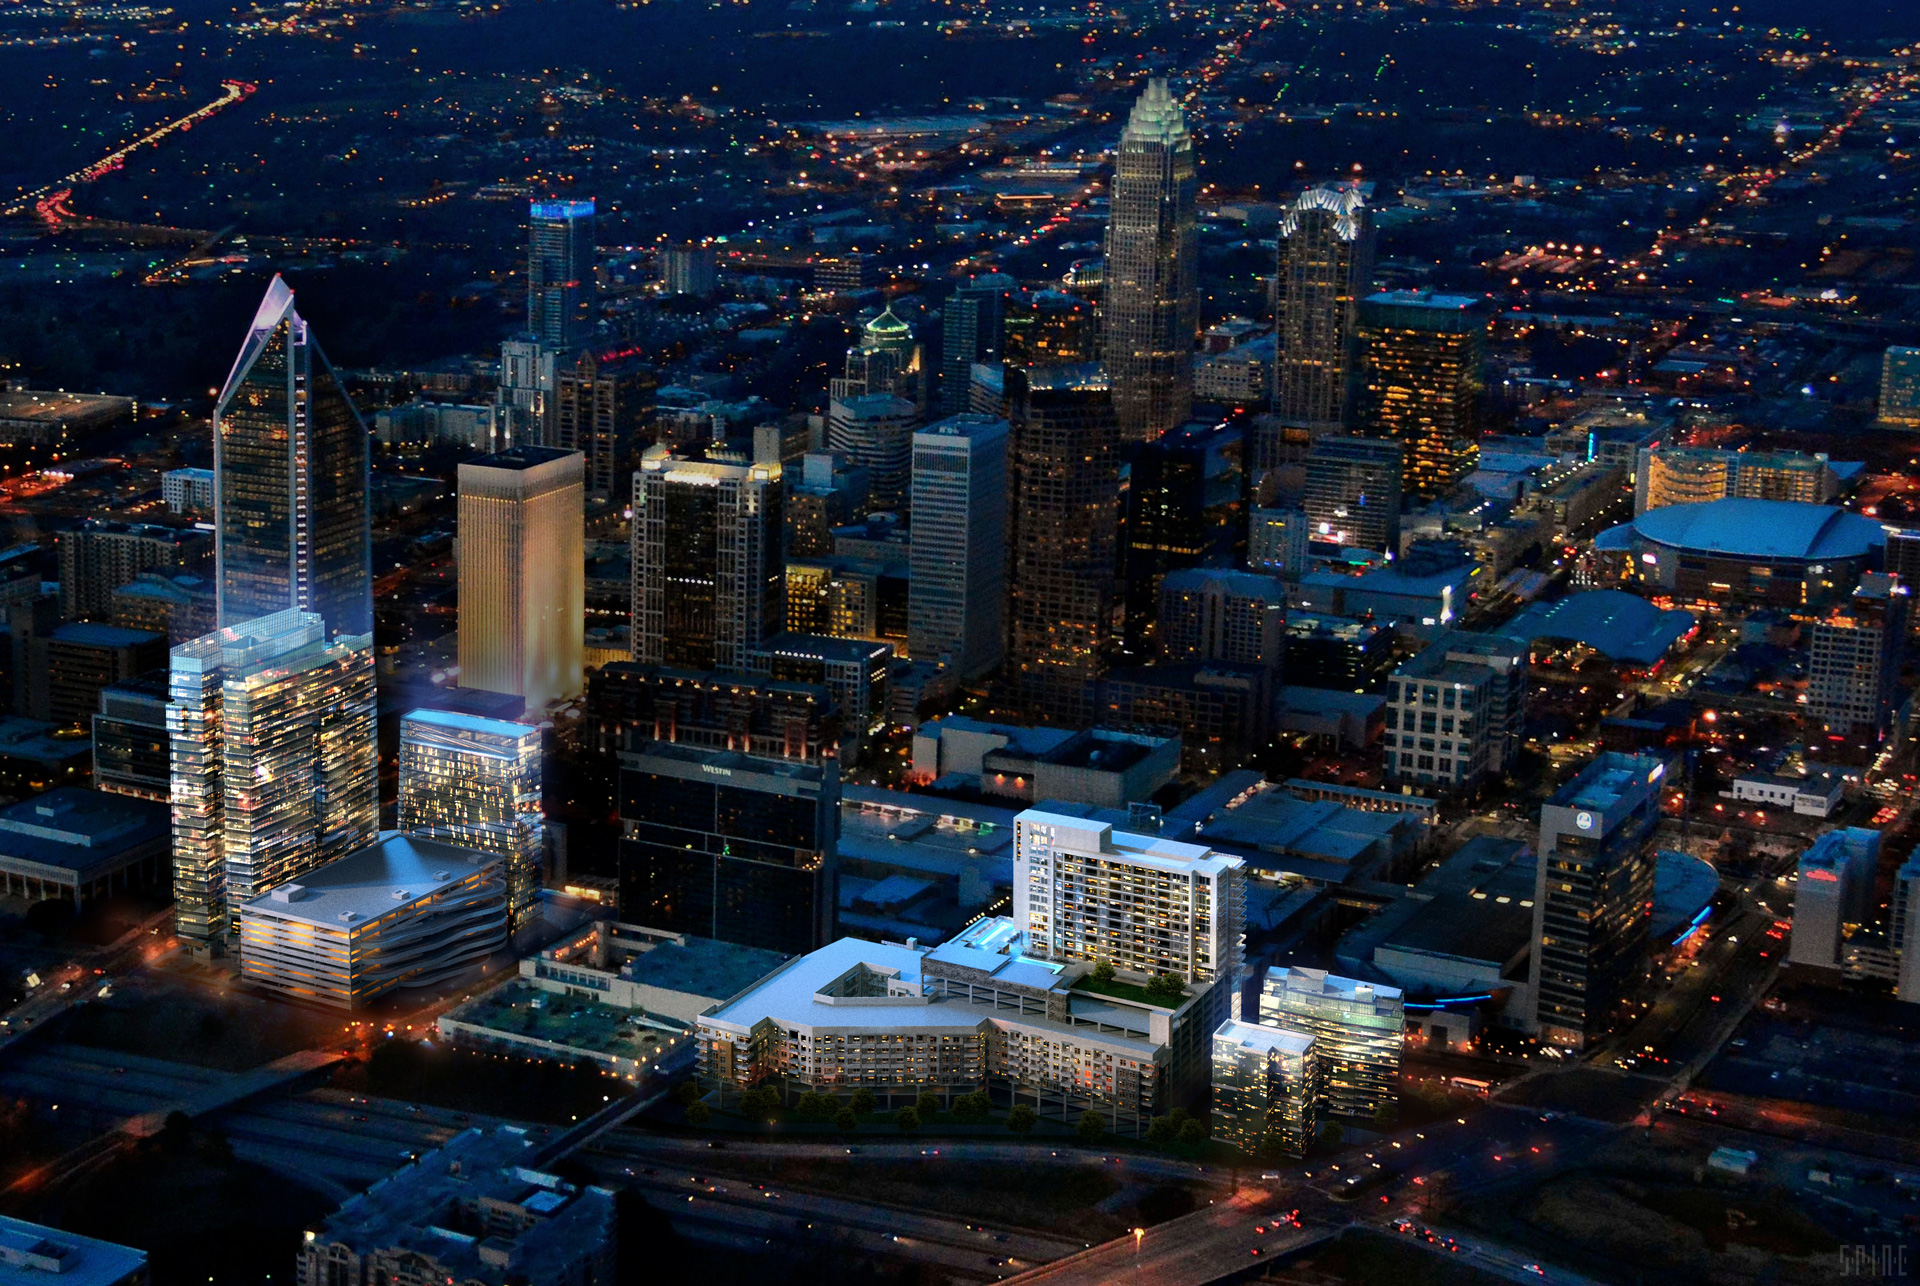 CHARLOTTE HAPPENINGS – A City on the Rise